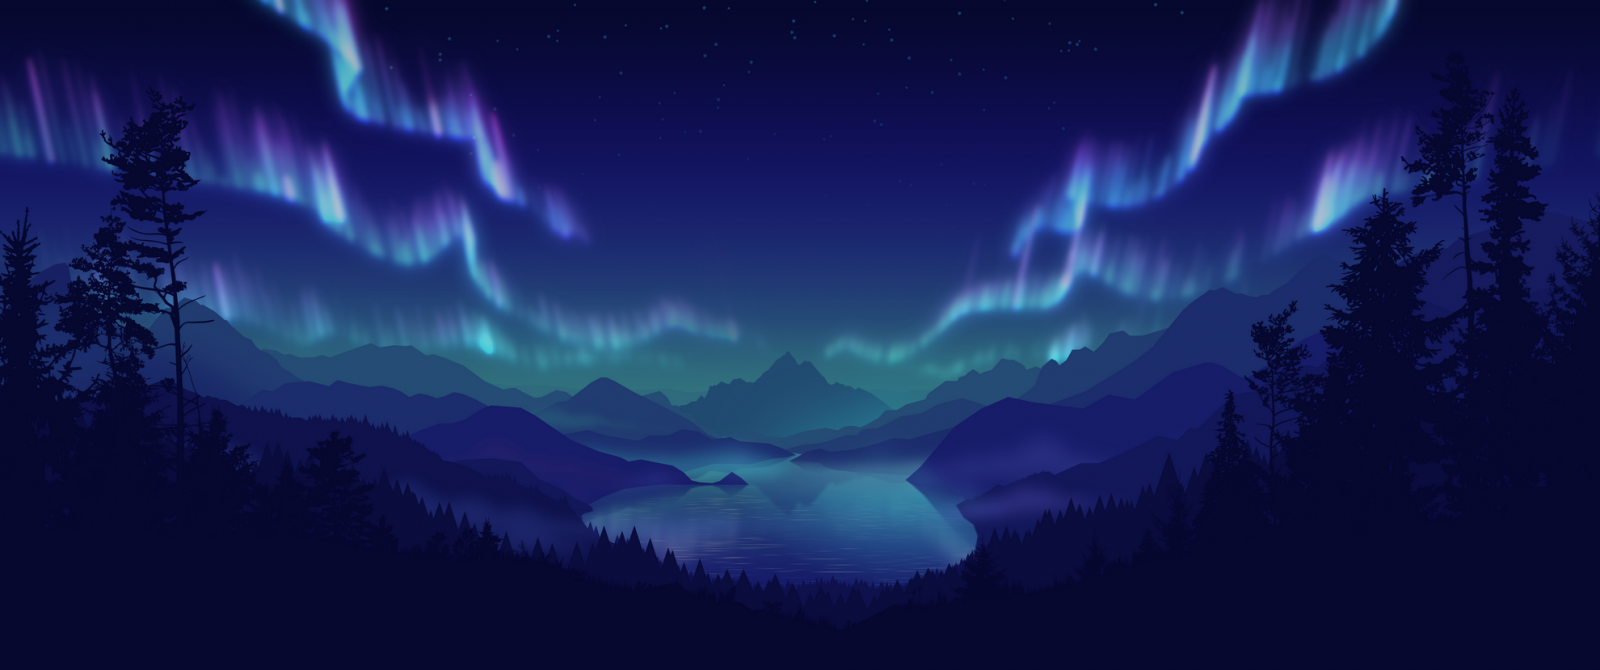 lakeside_2019_midnight.png